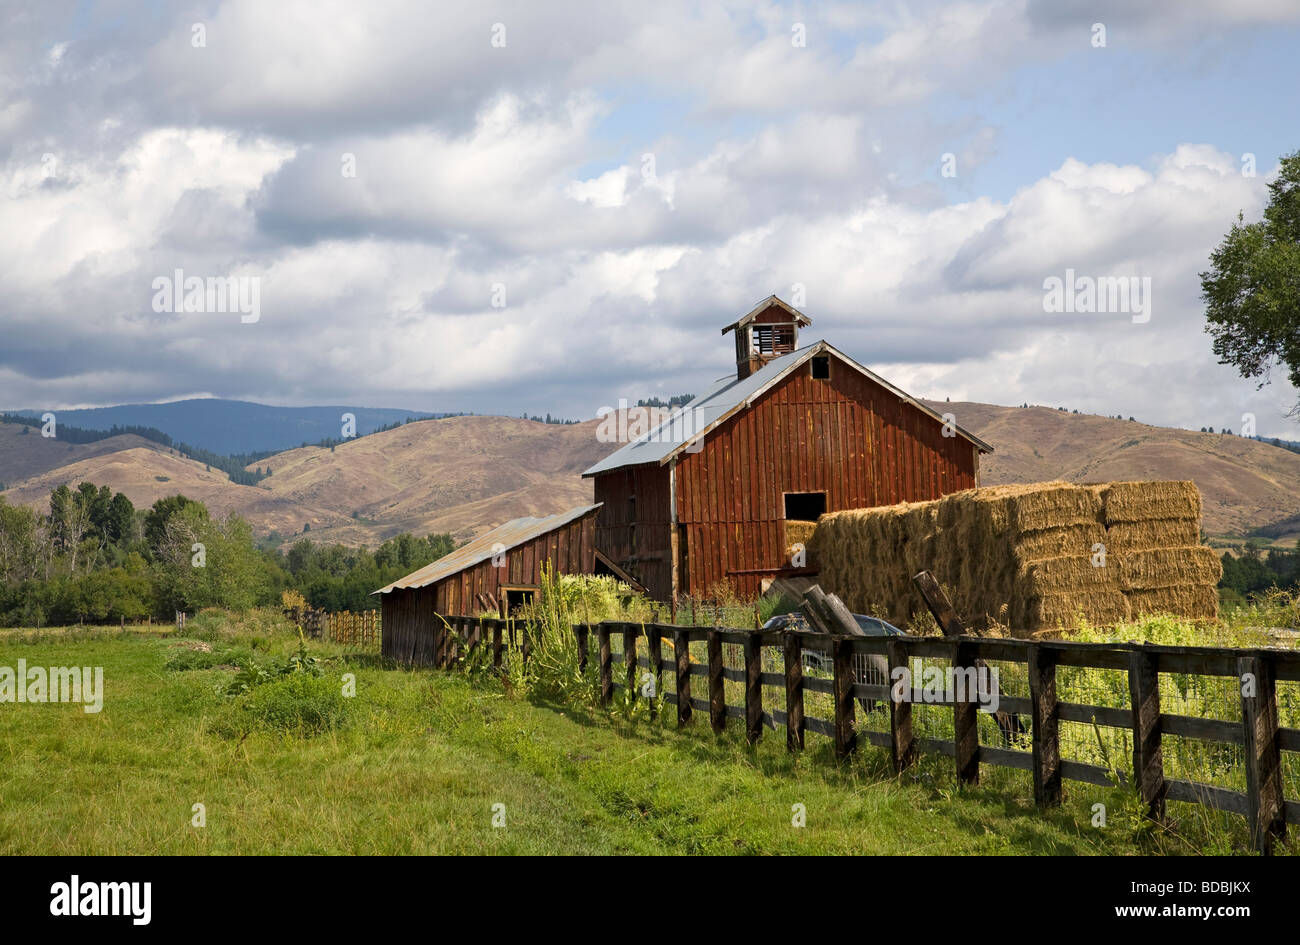 An old red barn and haystack on a ranch near Halfway Oregon on the slopes of the Wallowa Mountains in eastern Oregon Stock Photo